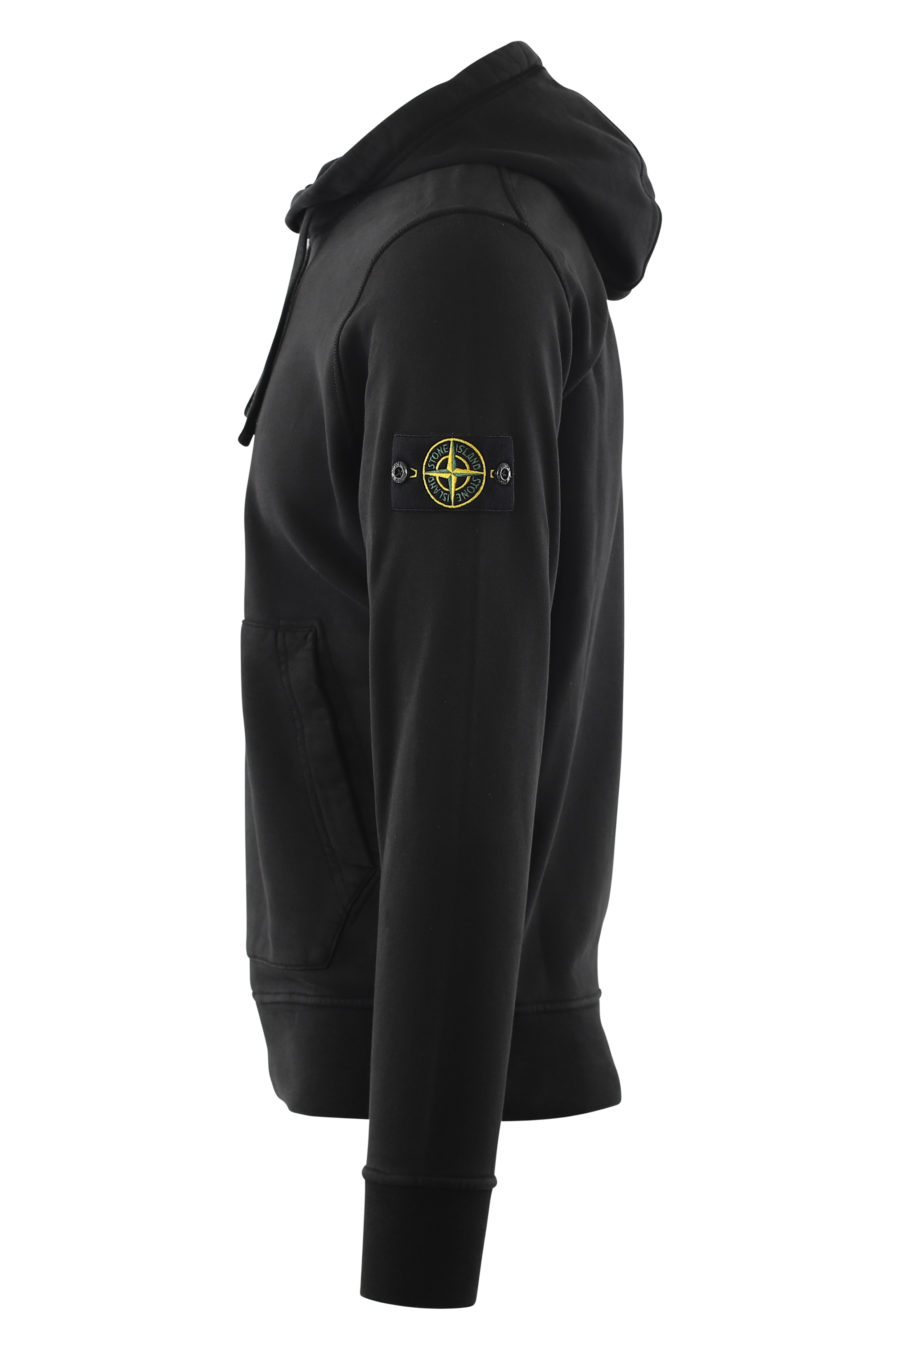 Black sweatshirt with hood and side patch - IMG 6596